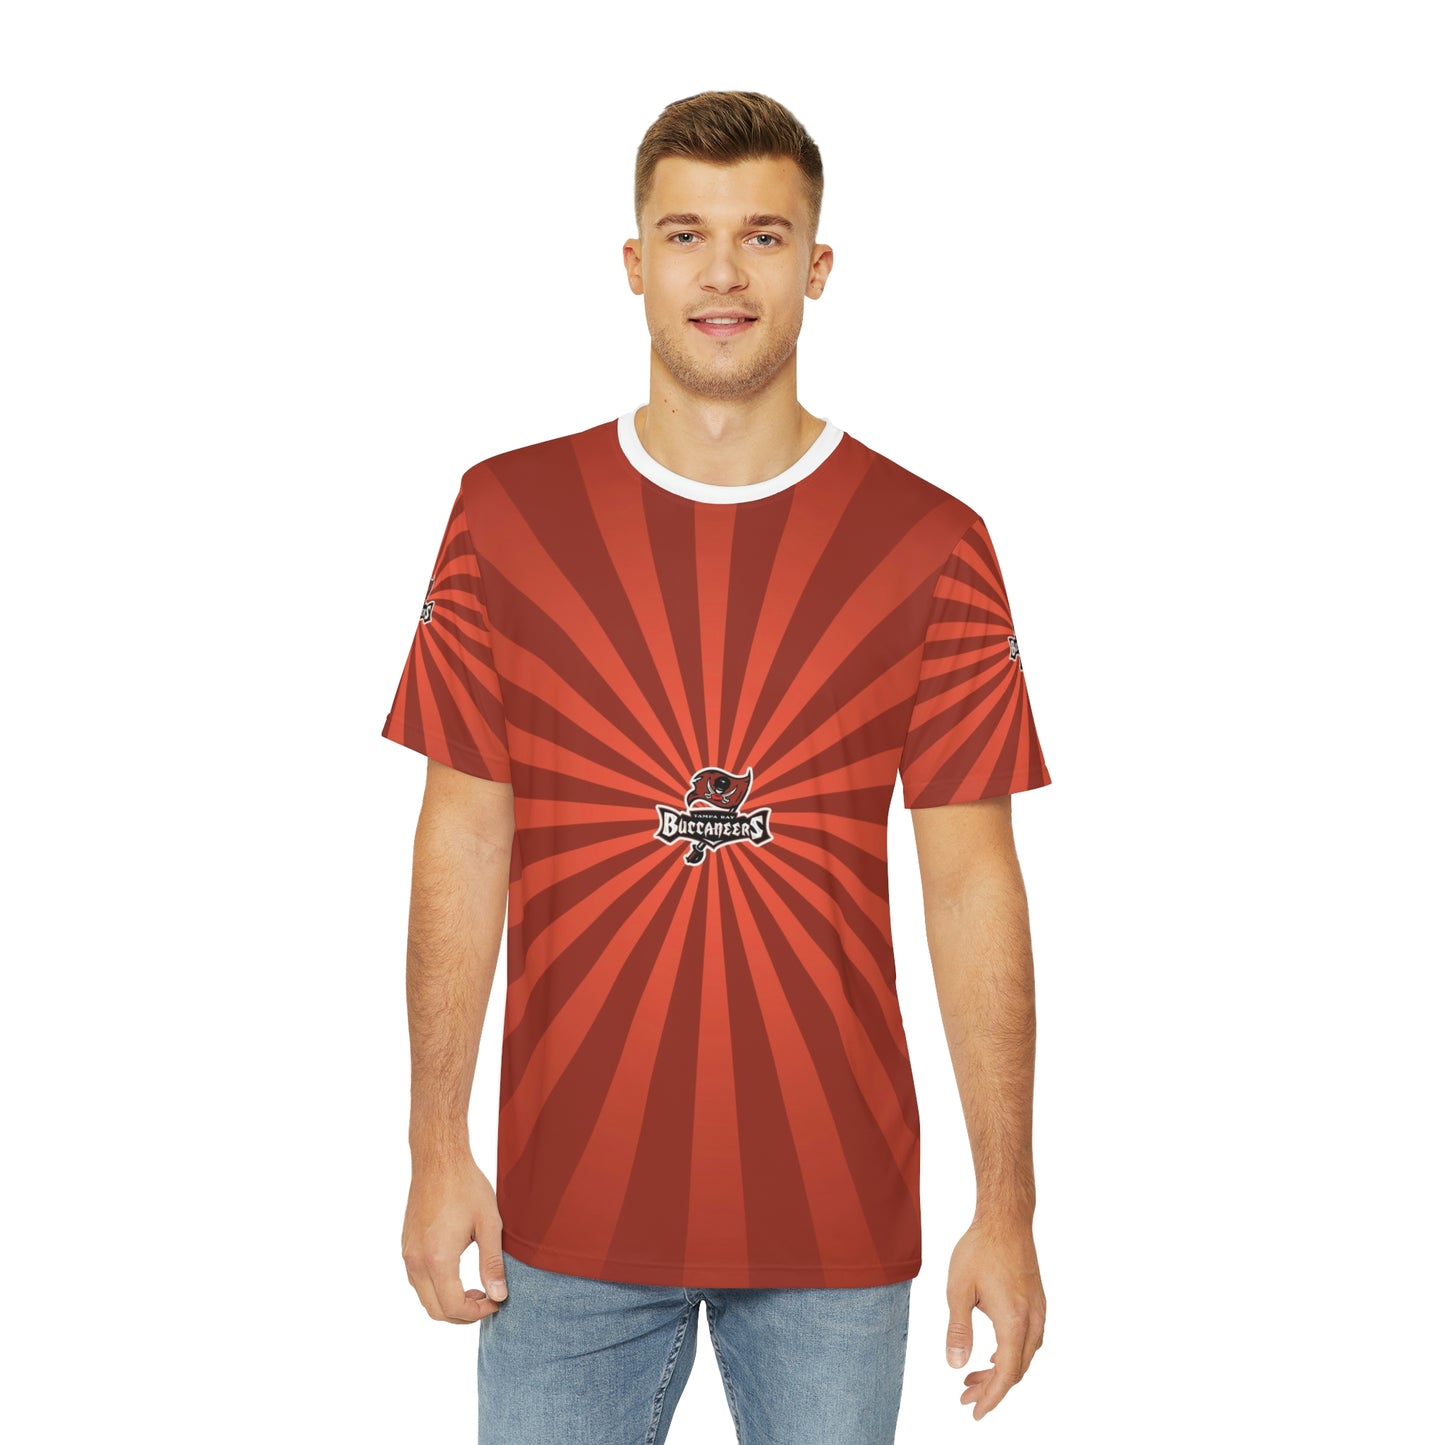 Geotrott NFL NO NAME1 Men's Polyester All Over Print Tee T-Shirt